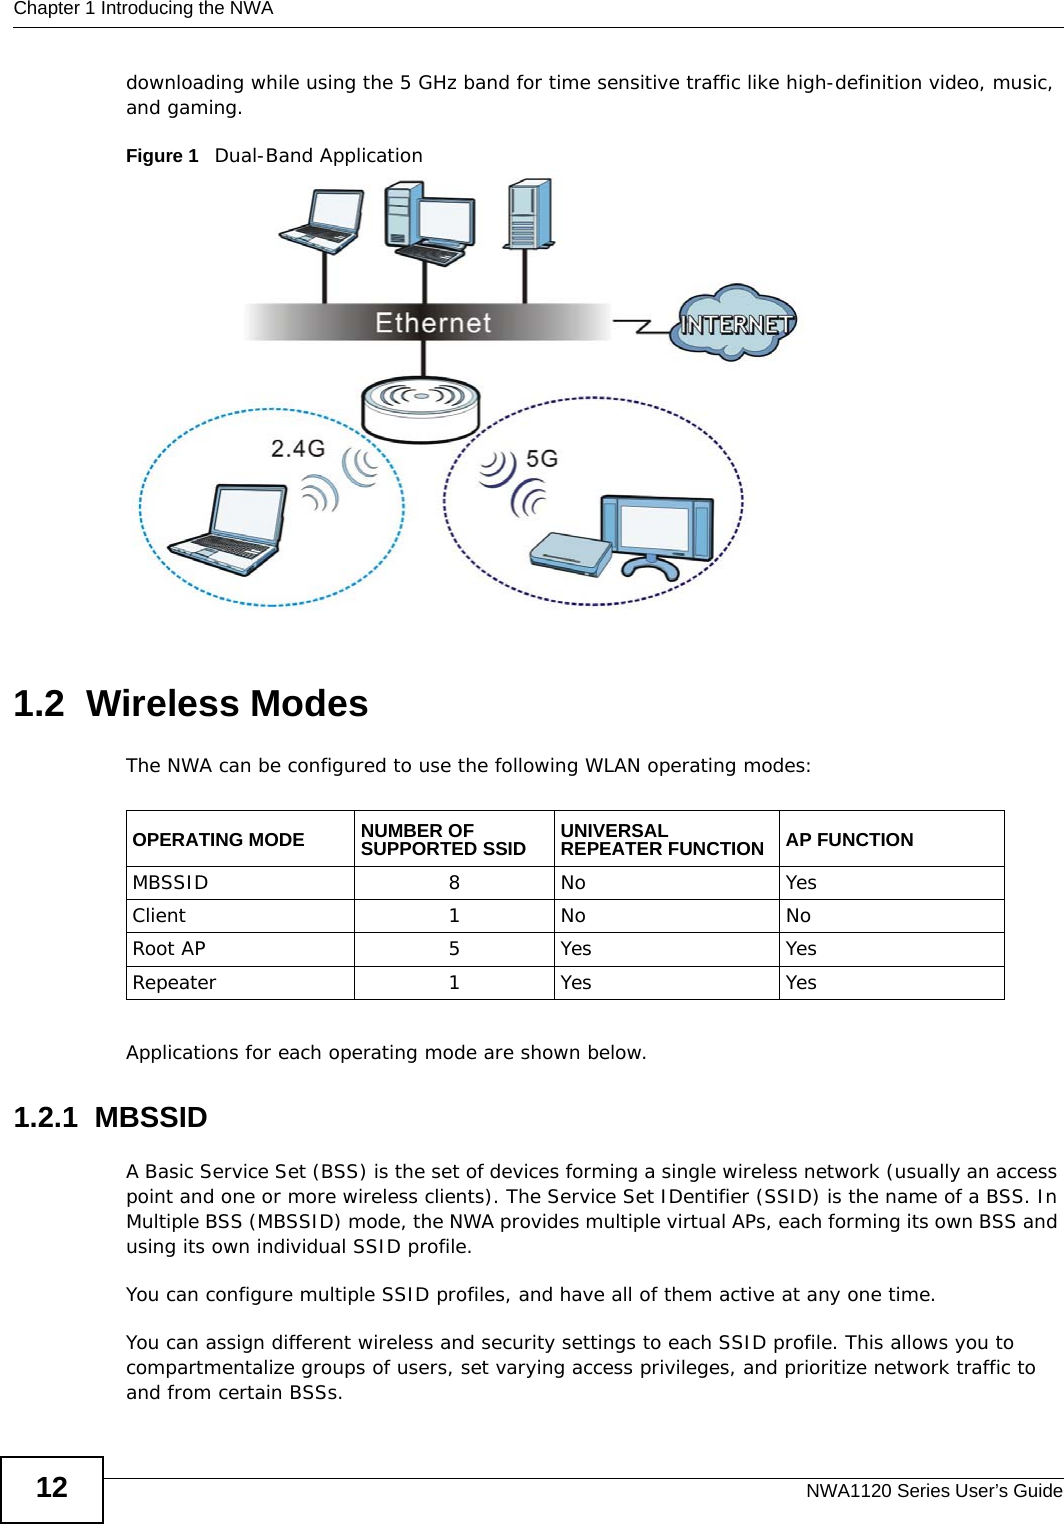 Chapter 1 Introducing the NWANWA1120 Series User’s Guide12downloading while using the 5 GHz band for time sensitive traffic like high-definition video, music, and gaming. Figure 1   Dual-Band Application 1.2  Wireless ModesThe NWA can be configured to use the following WLAN operating modes:Applications for each operating mode are shown below.1.2.1  MBSSIDA Basic Service Set (BSS) is the set of devices forming a single wireless network (usually an access point and one or more wireless clients). The Service Set IDentifier (SSID) is the name of a BSS. In Multiple BSS (MBSSID) mode, the NWA provides multiple virtual APs, each forming its own BSS and using its own individual SSID profile.You can configure multiple SSID profiles, and have all of them active at any one time.You can assign different wireless and security settings to each SSID profile. This allows you to compartmentalize groups of users, set varying access privileges, and prioritize network traffic to and from certain BSSs.OPERATING MODE NUMBER OF SUPPORTED SSID UNIVERSAL REPEATER FUNCTION AP FUNCTIONMBSSID 8 No YesClient 1 No NoRoot AP 5 Yes YesRepeater 1 Yes Yes